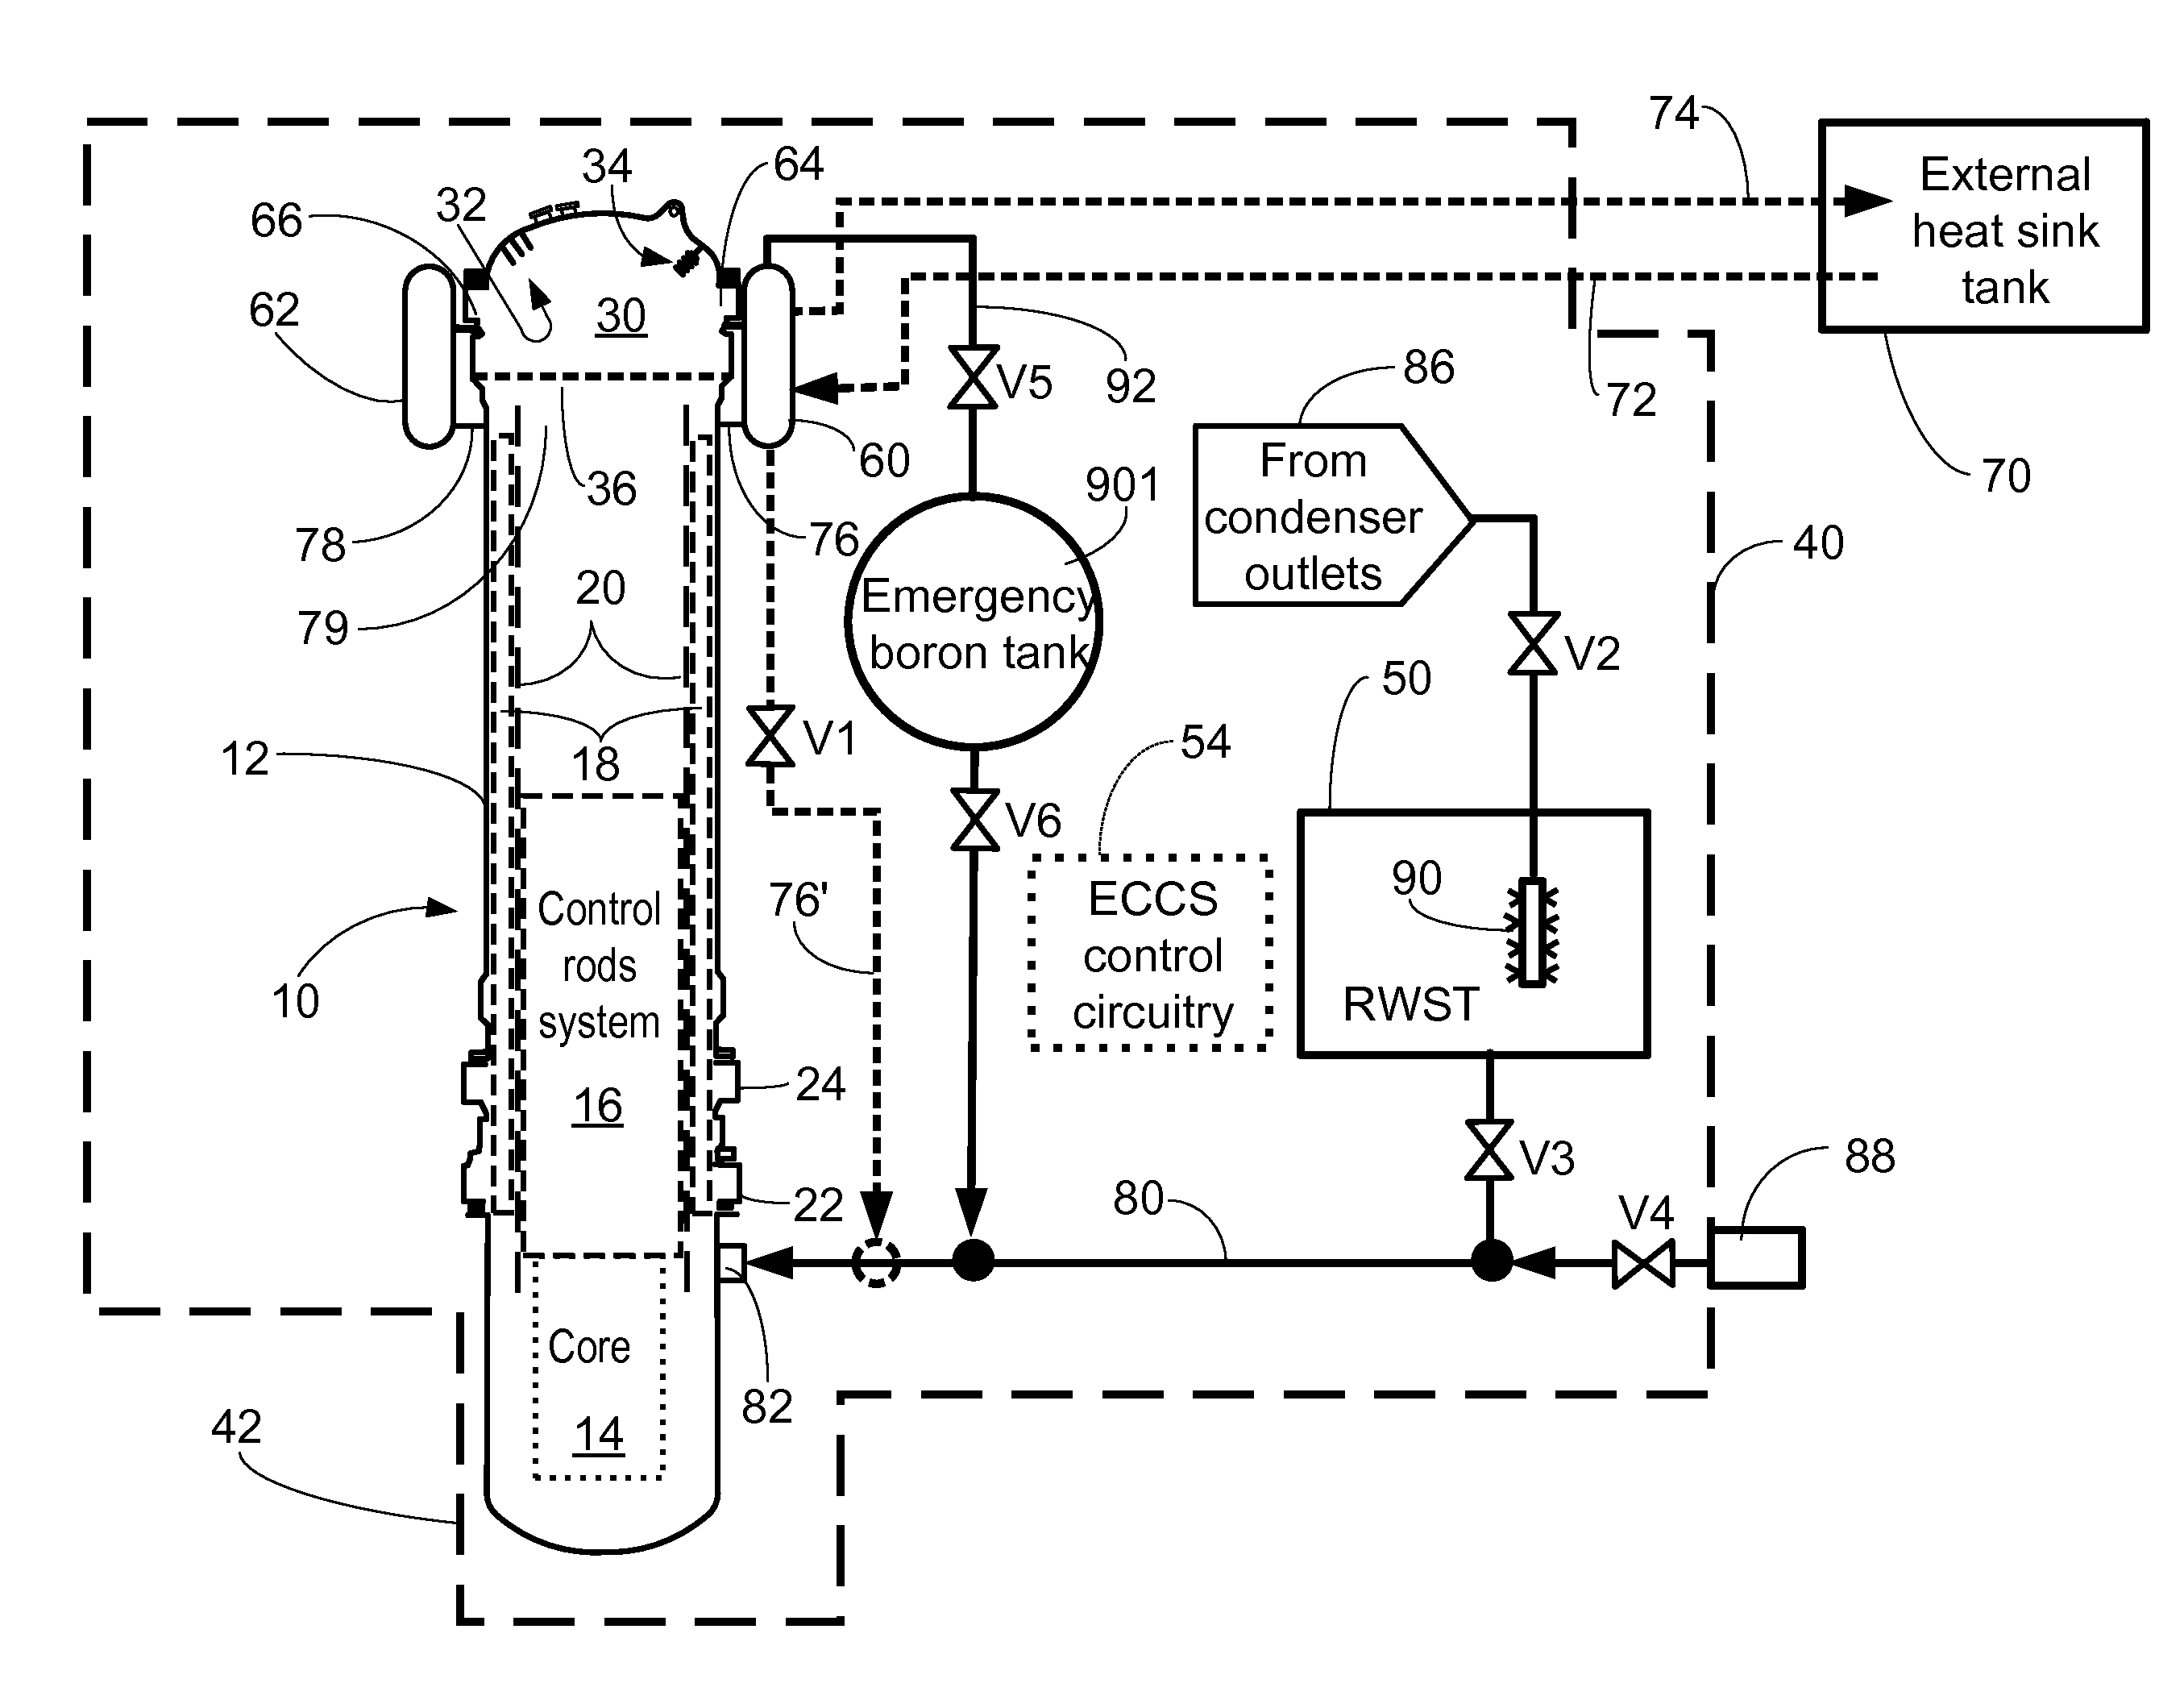 Integrated emergency core cooling system condenser for pressurized water reactor